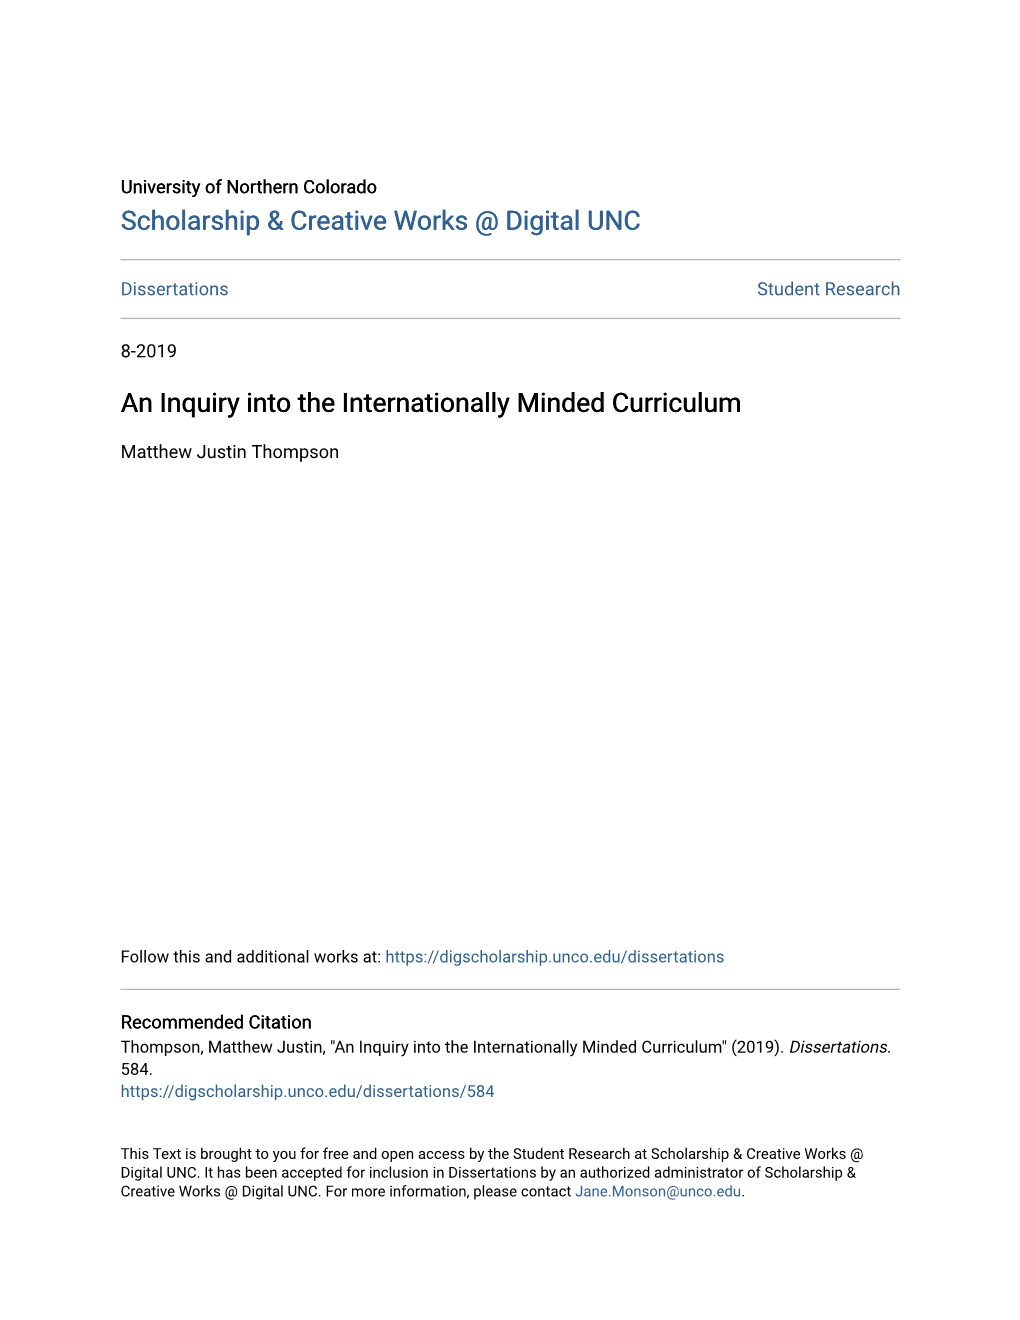 An Inquiry Into the Internationally Minded Curriculum